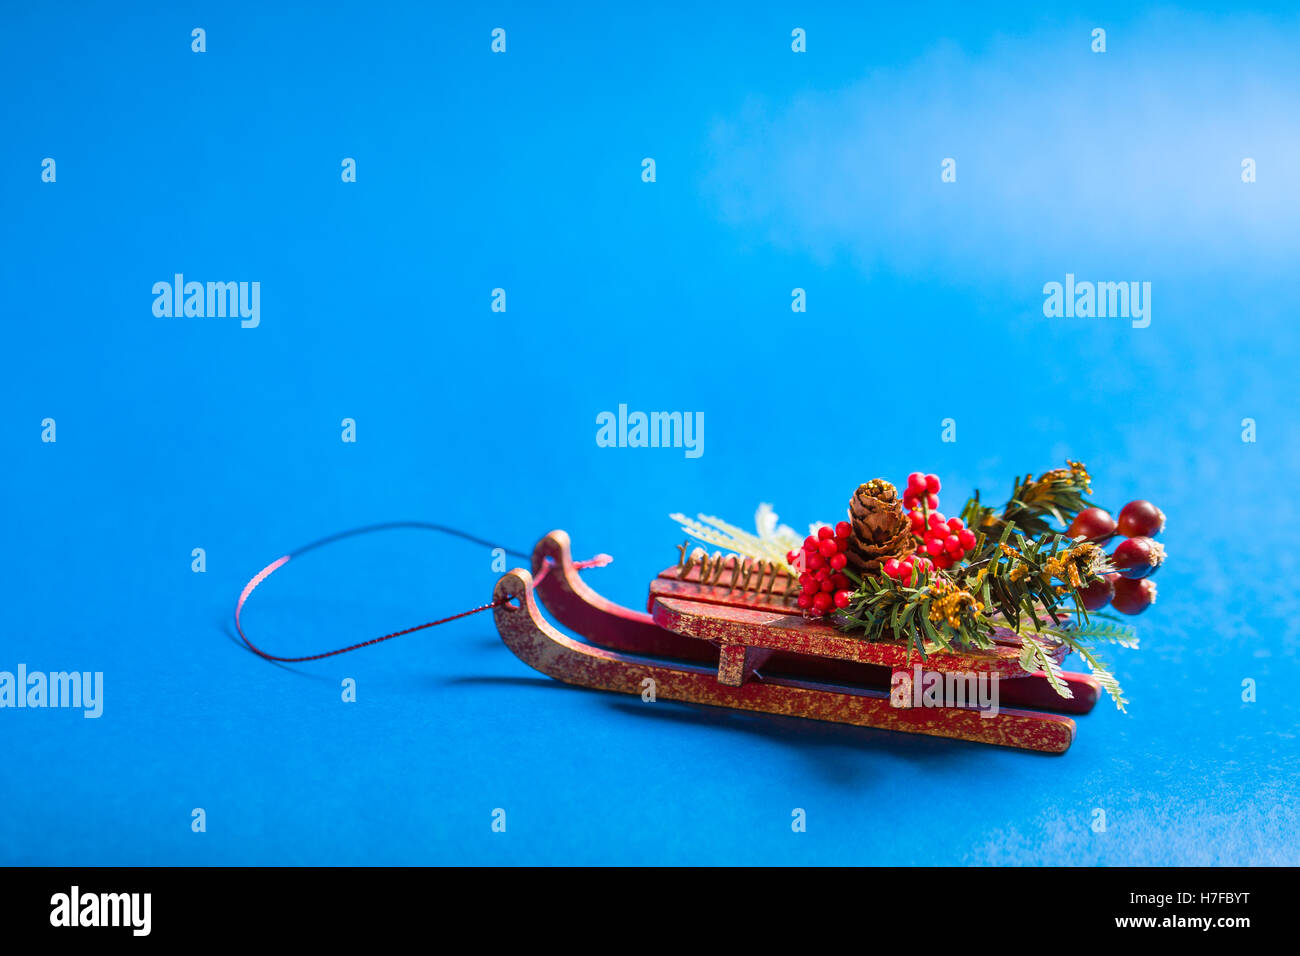 Christmas card with decorative sledge standing on blue background. Stock Photo